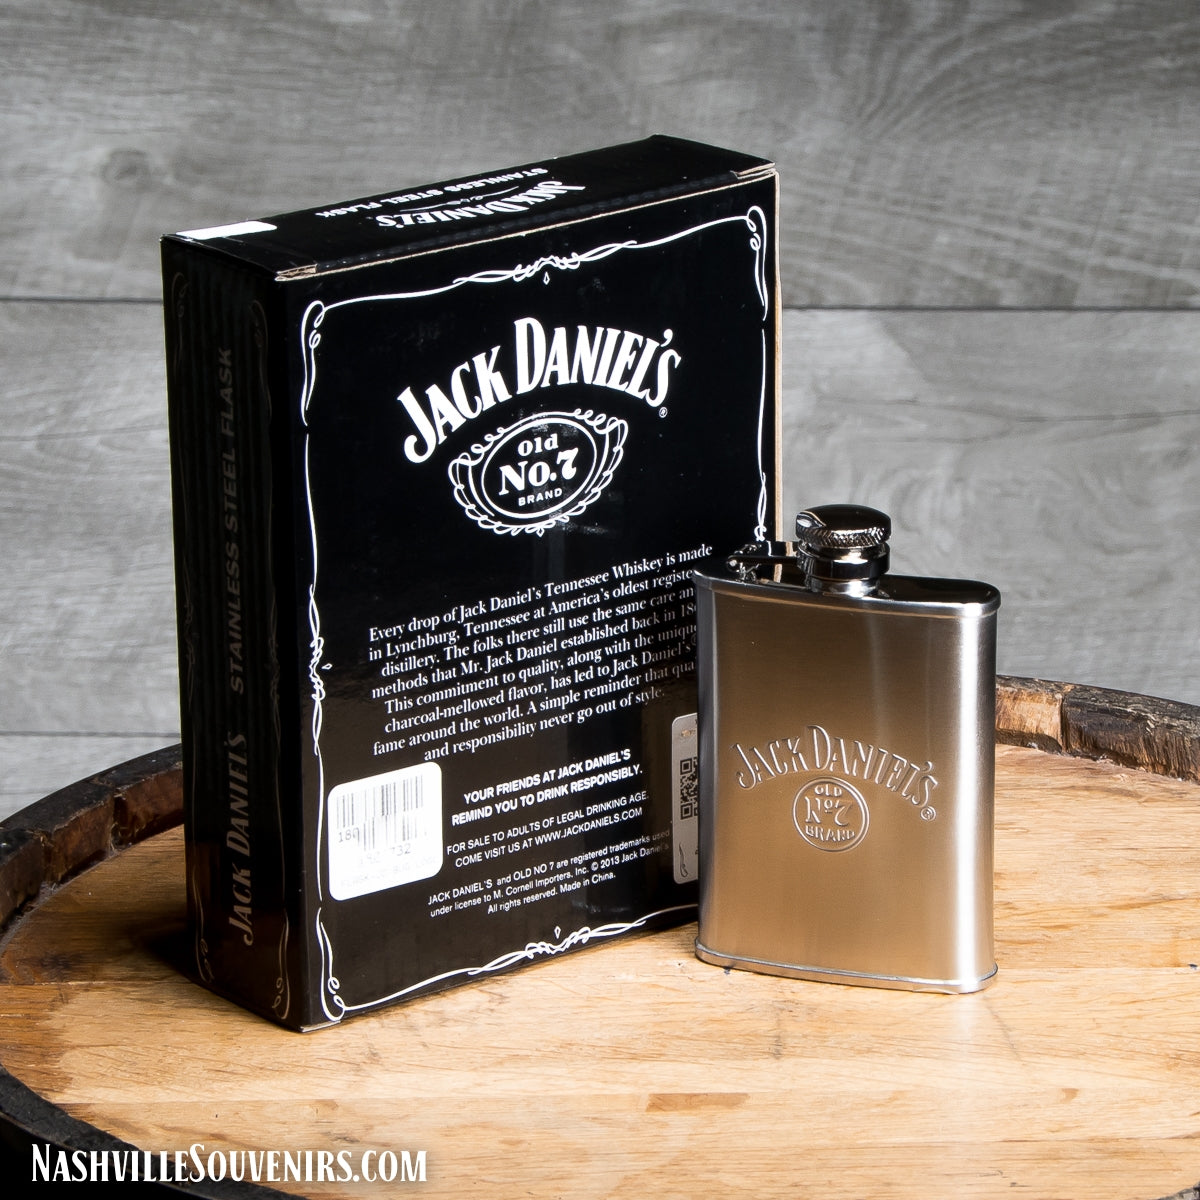 Officially licensed Jack Daniels Stainless Steel Embossed Logo Flask.  FREE SHIPPING on all US orders over $75!